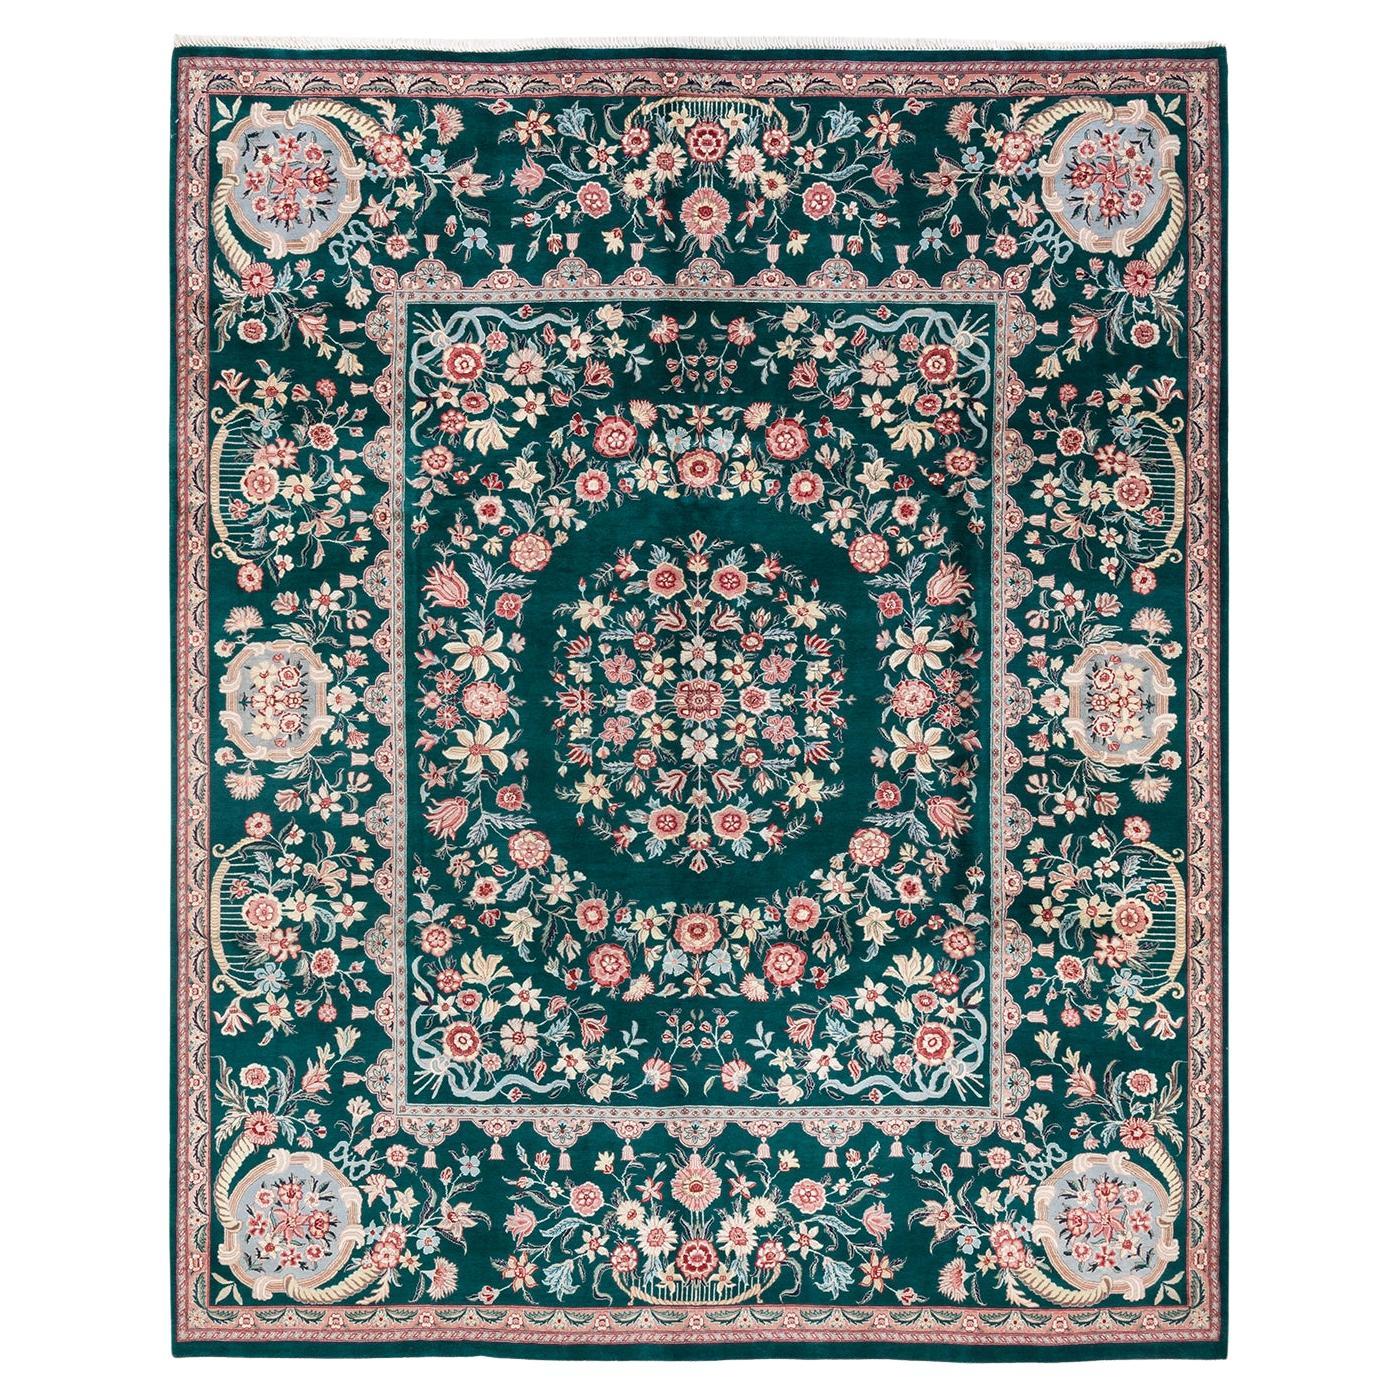 One-of-a-kind Hand Knotted Wool Mogul Green Area Rug